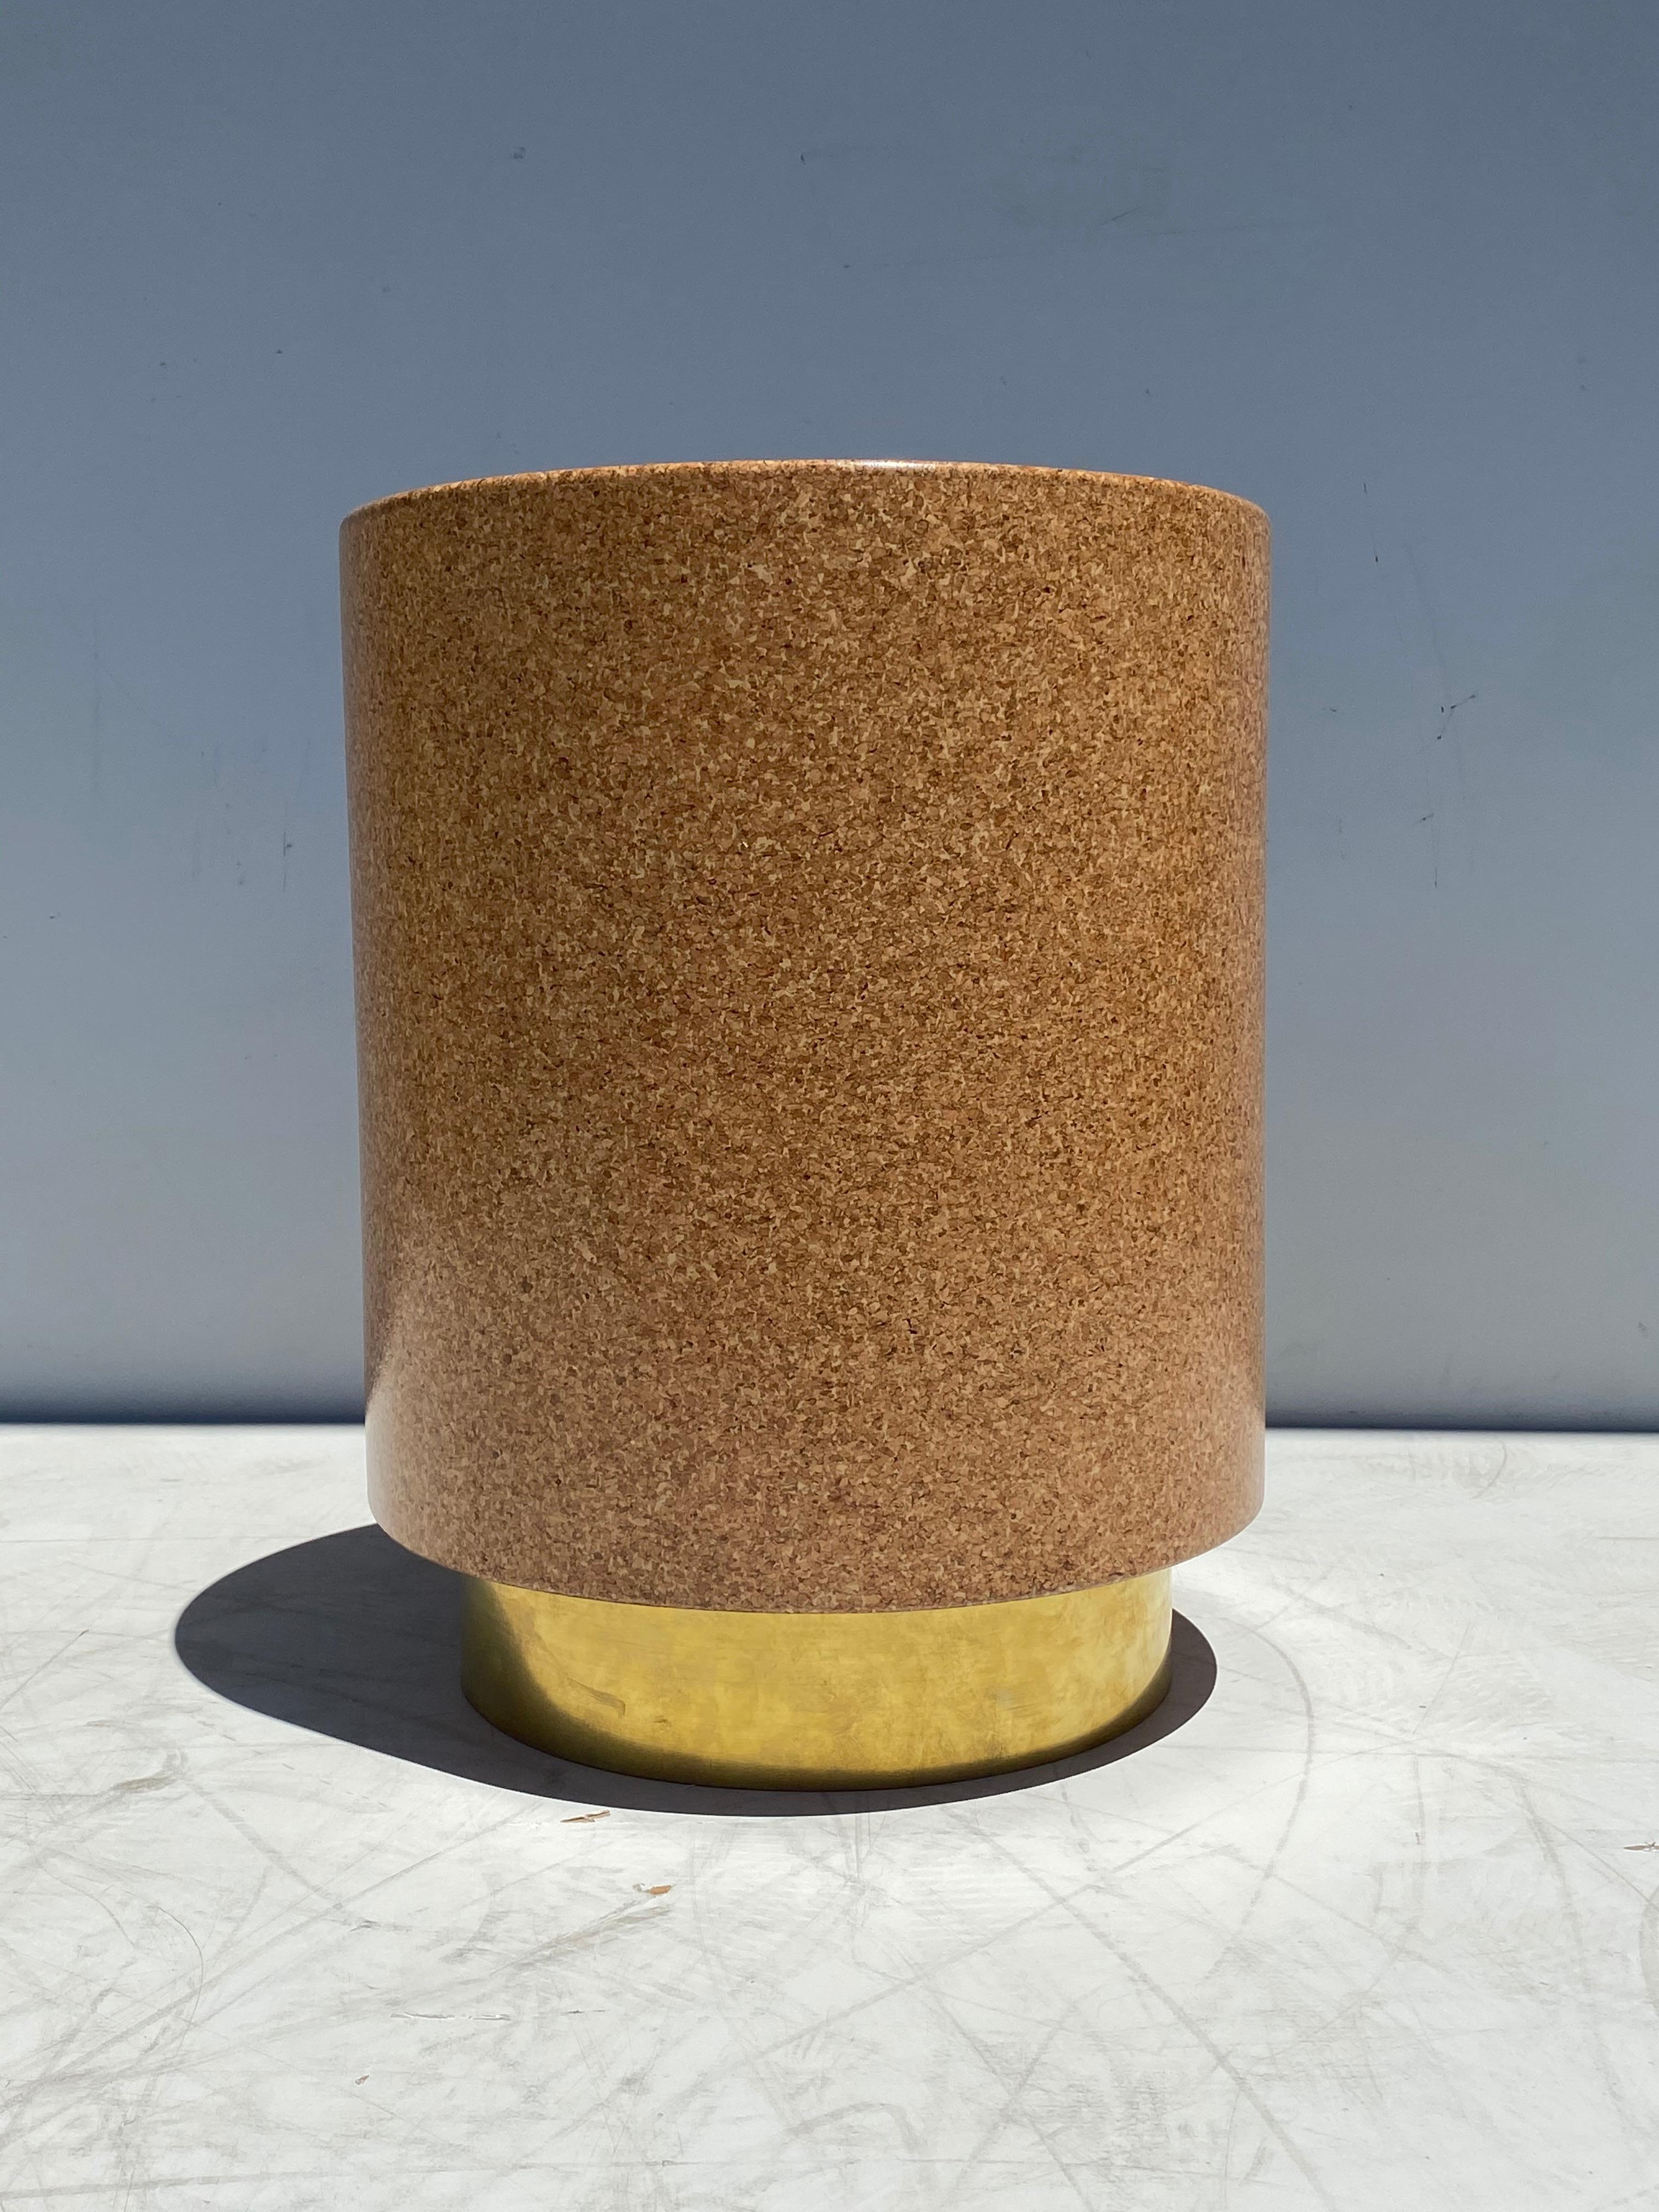 Round cork and brass side table or stool. Brass base is not lacquered and will get patinated over time. Newly made inspired by midcentury furniture designers like Paul Frankl, Charlotte Perriand, Robsjohn Gibbings, Milo Baughman and Harvey Probber.